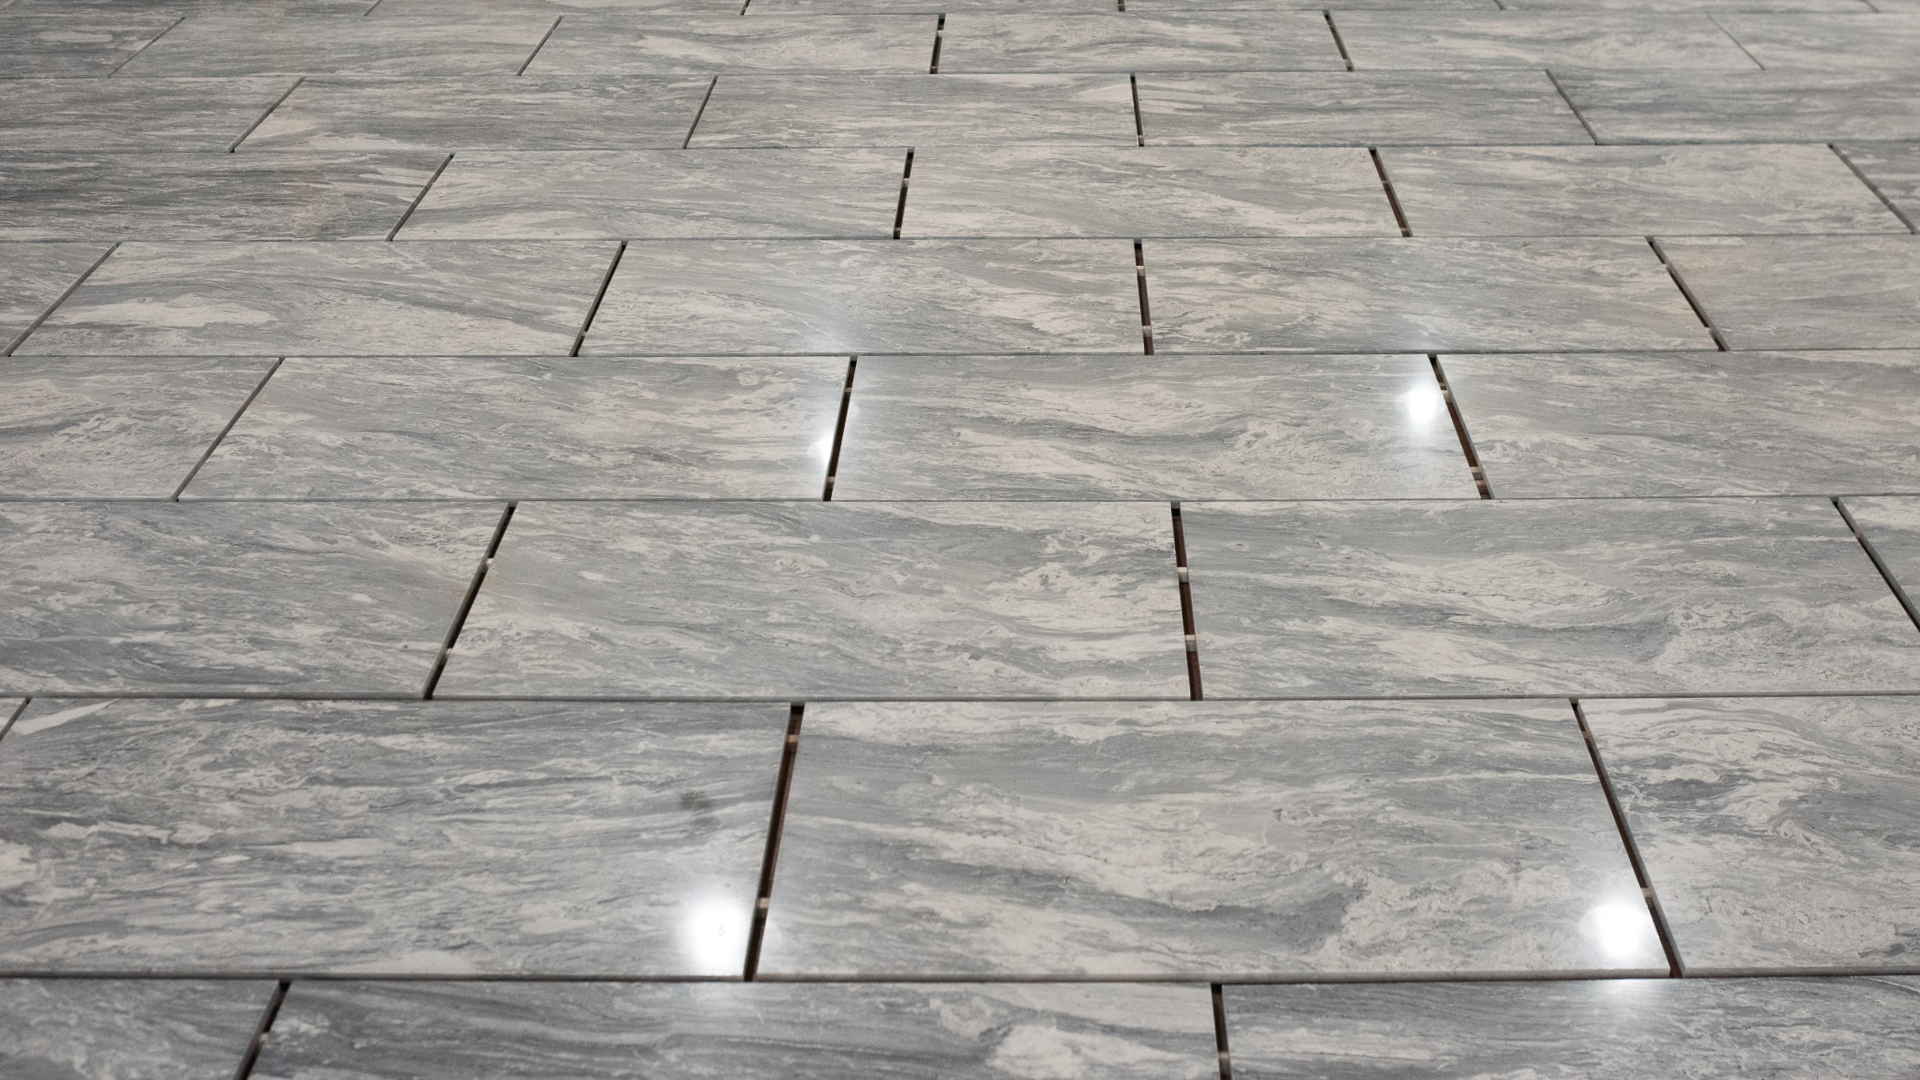 Close-up image of grey marble tiles with a cloudy surface placed perfectly with the dry lay method